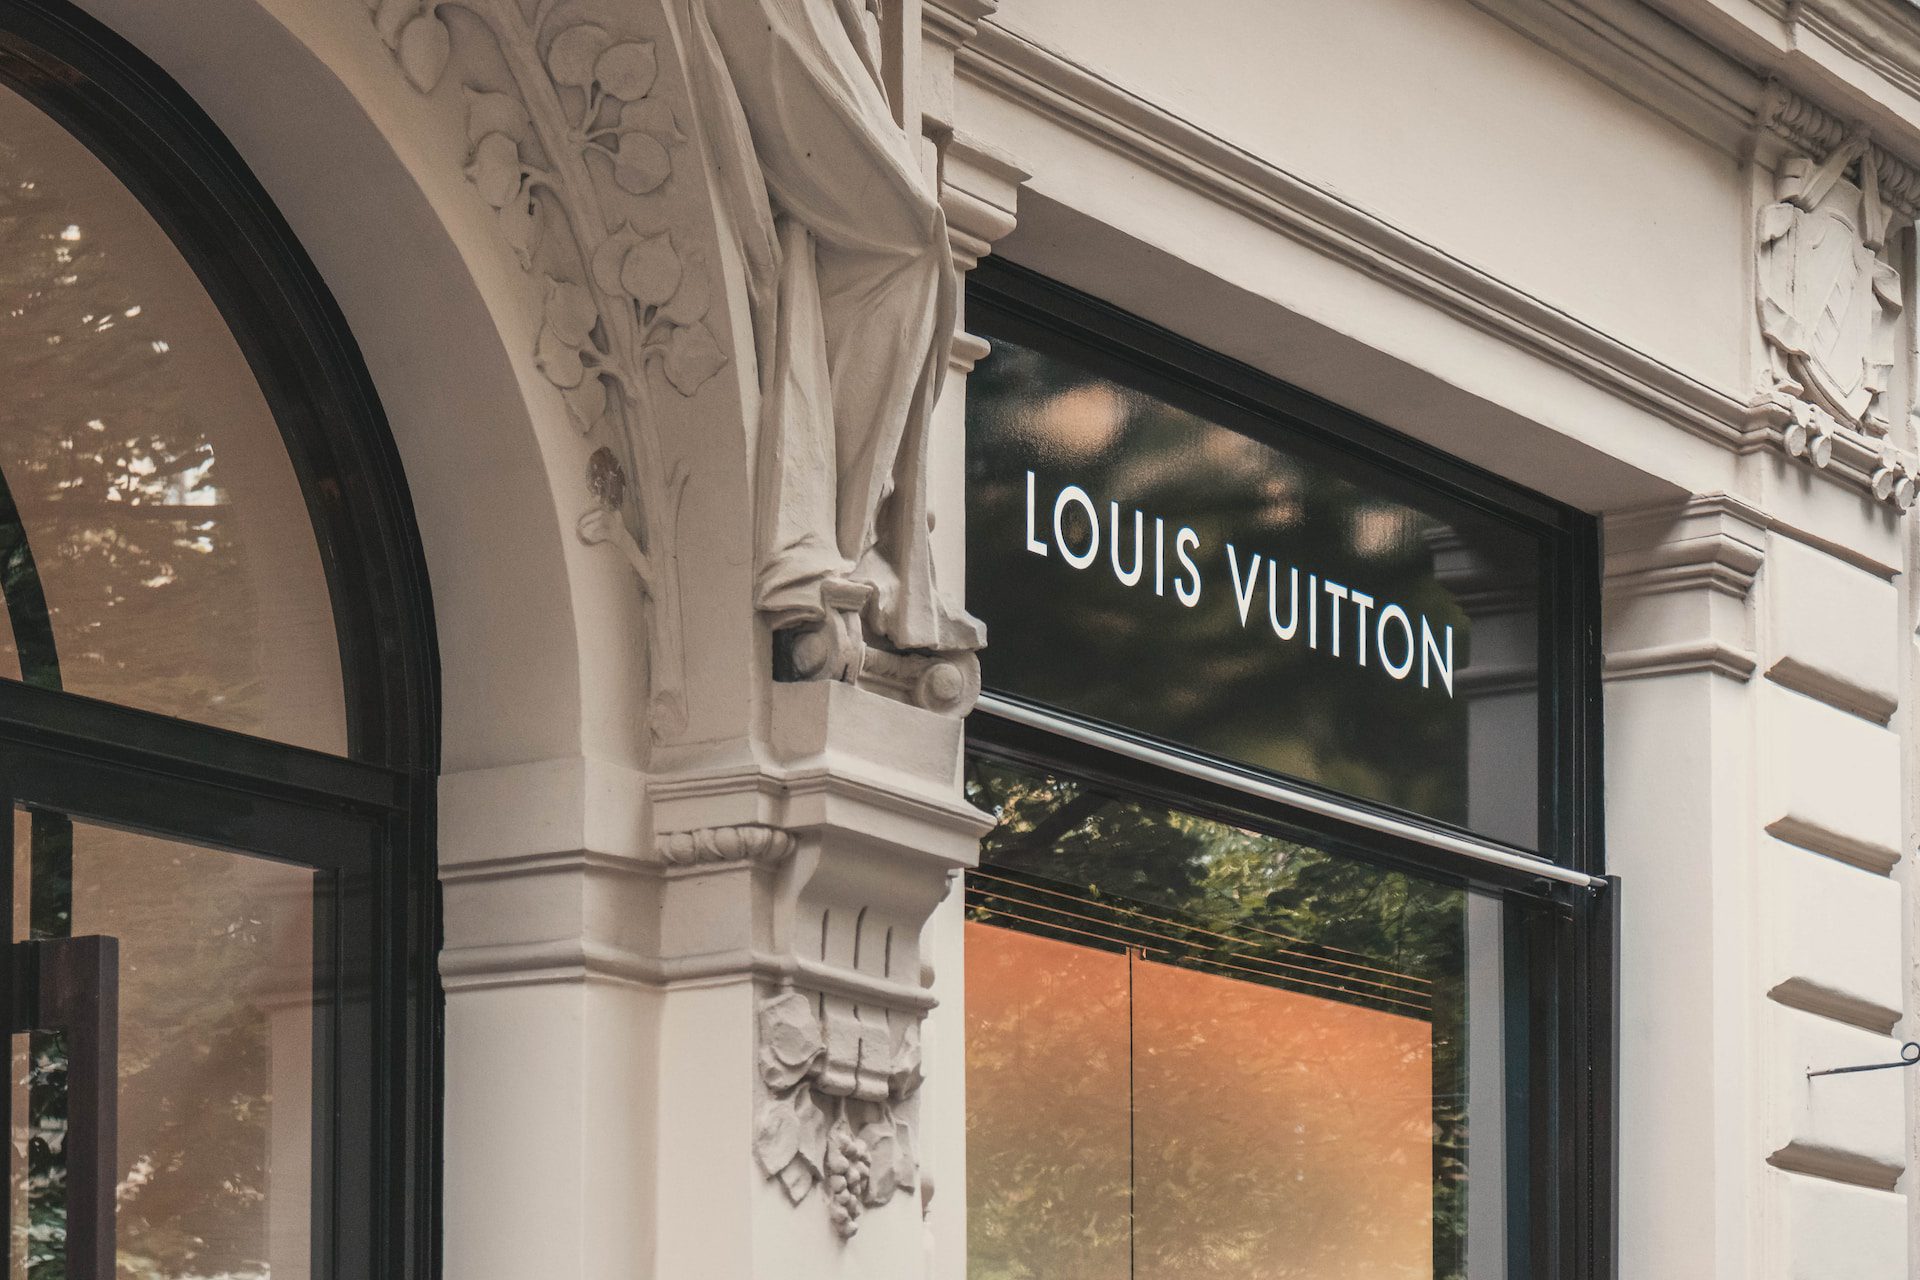 LVMH's Market Value Exceeds $500 Billion, a First in Europe